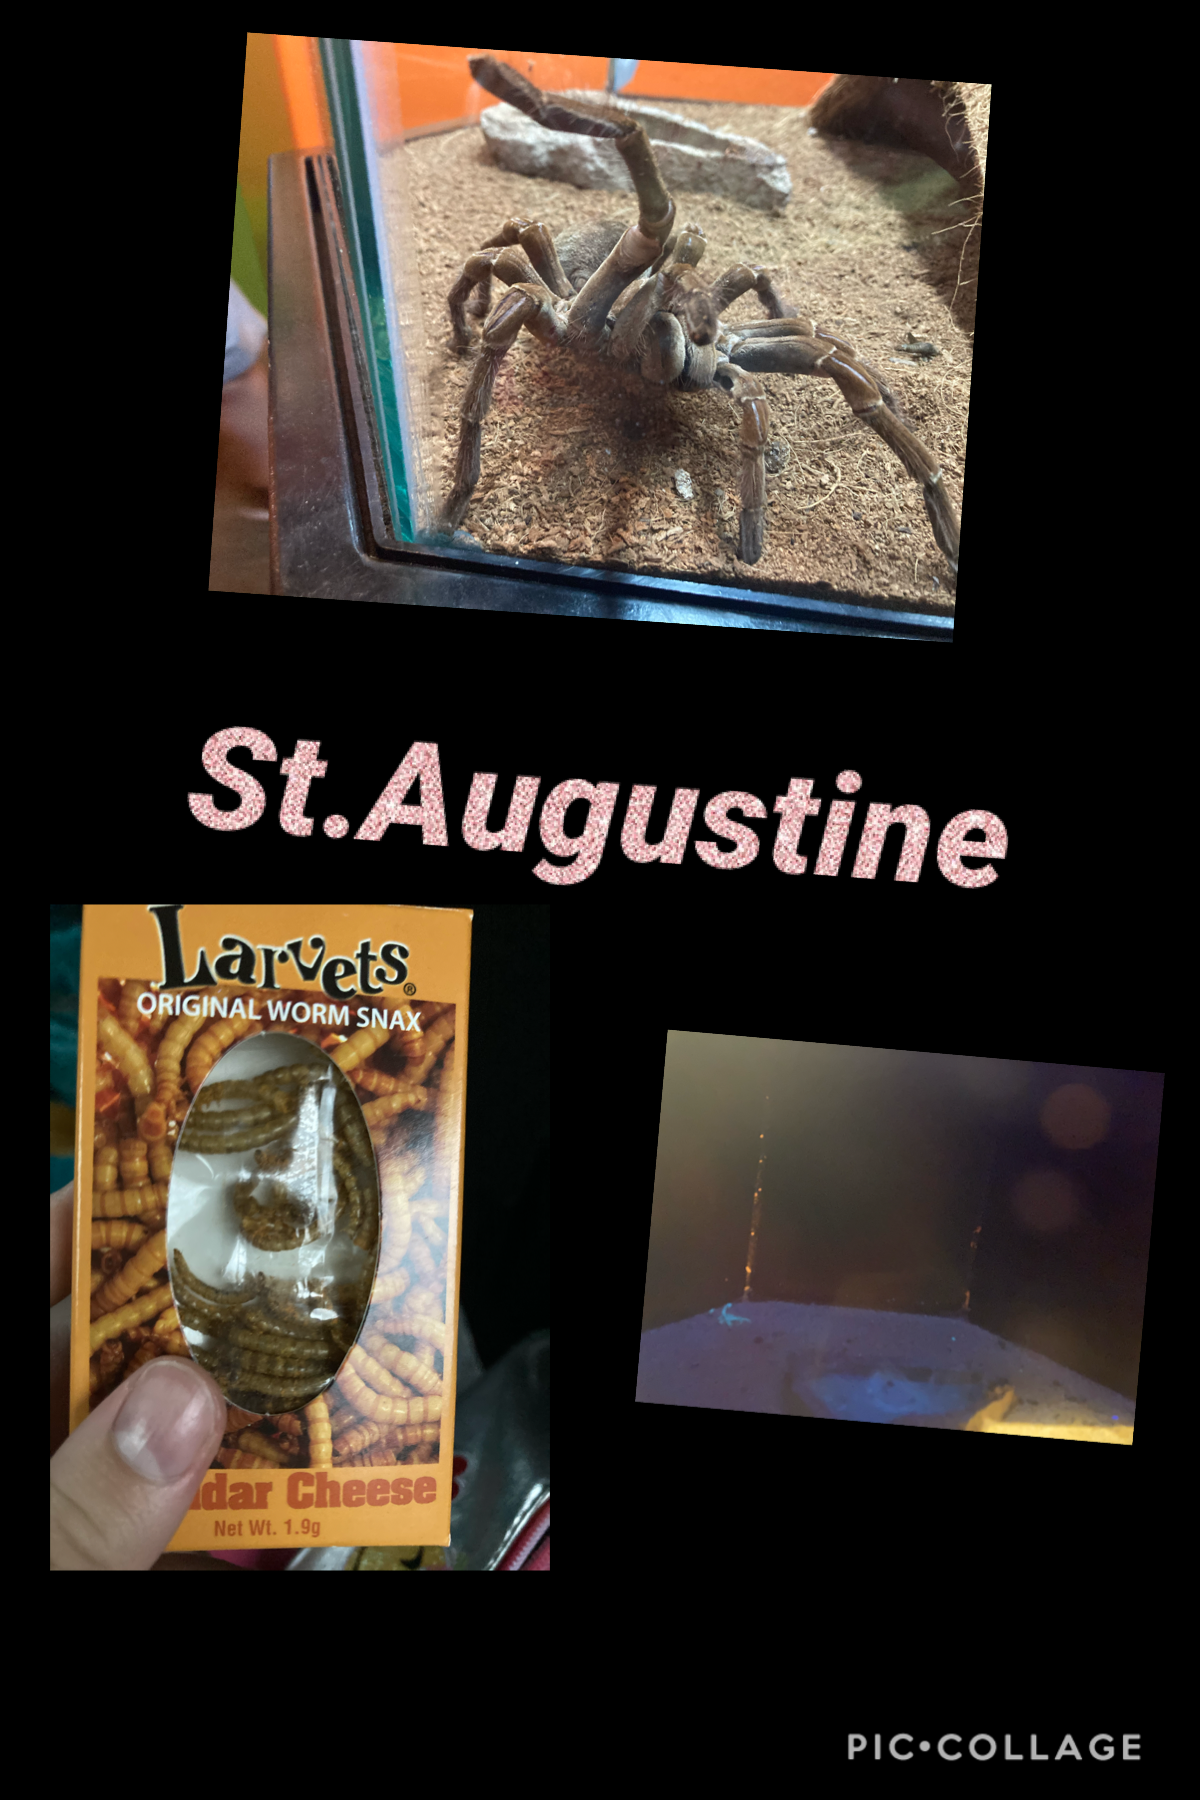 I went to at Augustine but I didn’t get any pictures of ripleys believe or not sorry guys